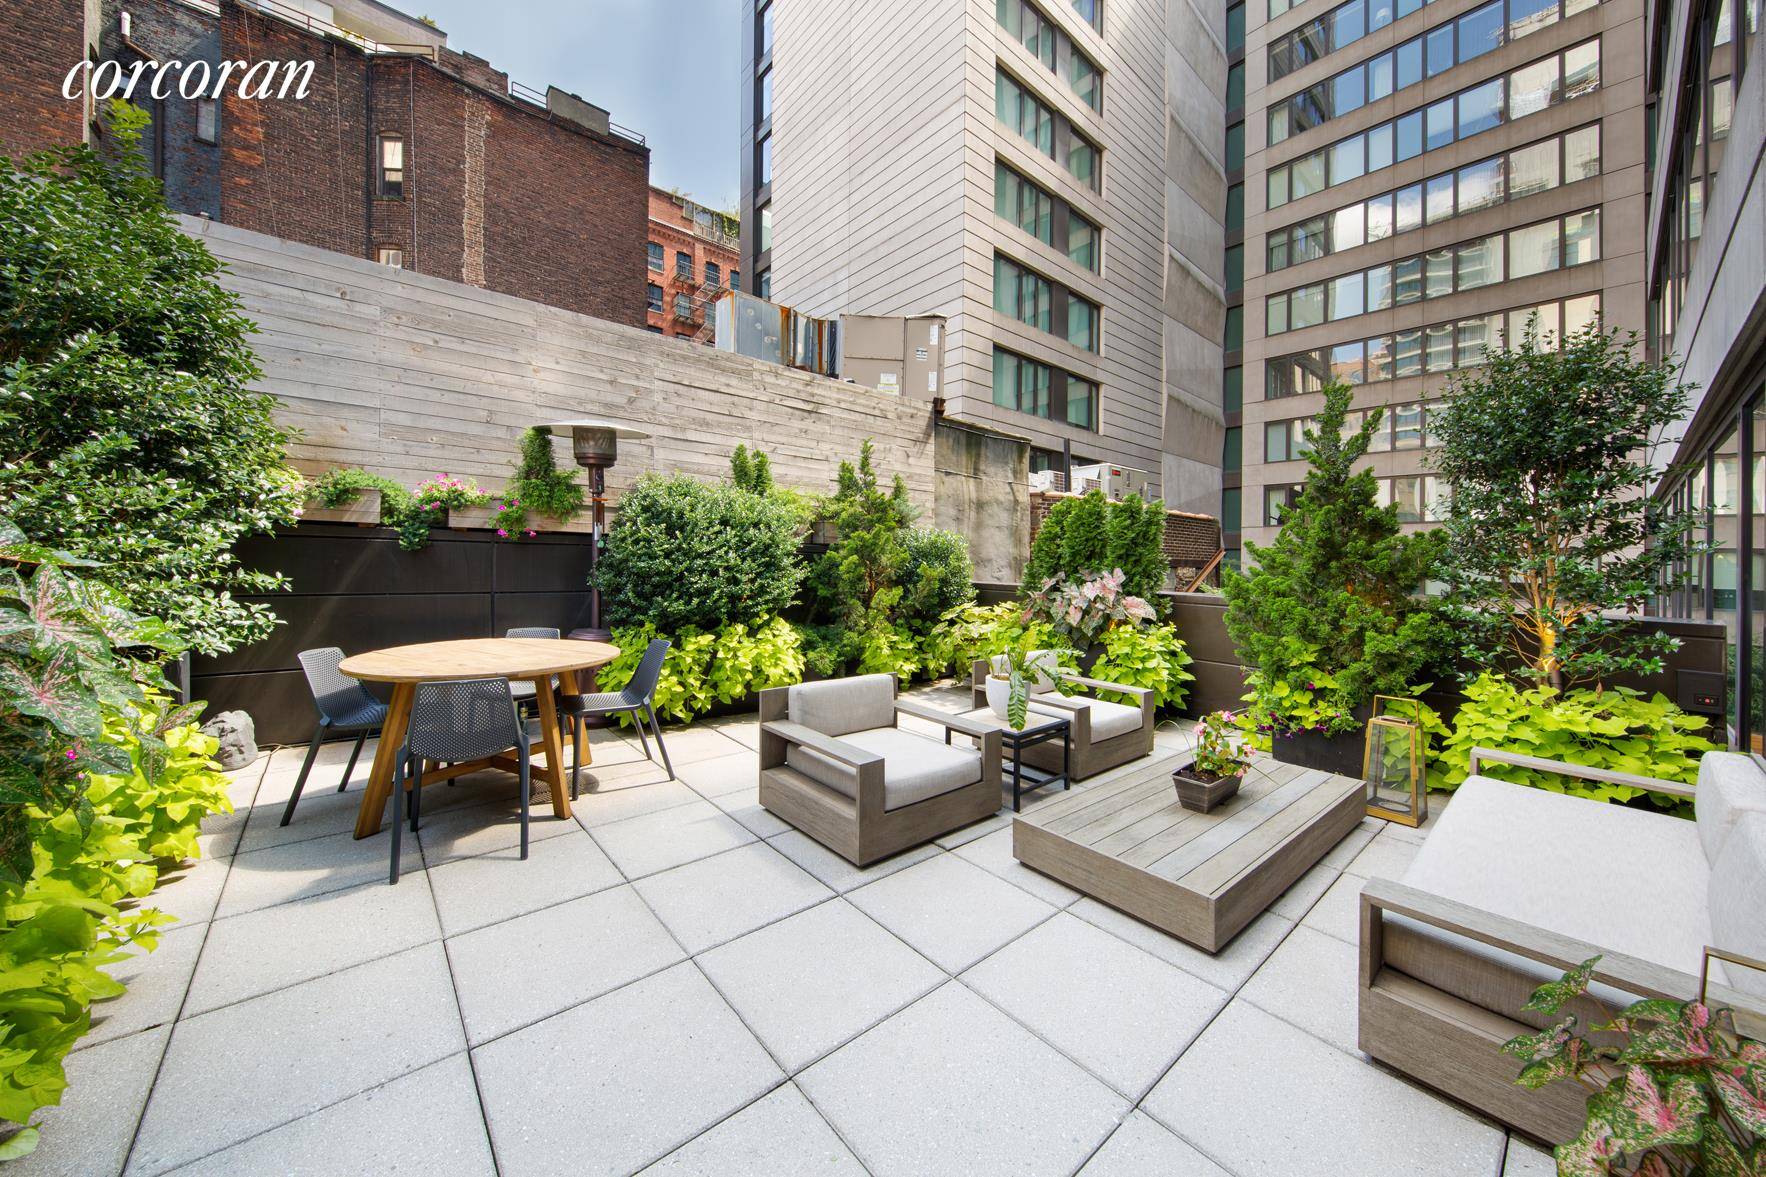 Residence 2C at 505 Greenwich Street provides the outdoor space and work from home space you are looking for.